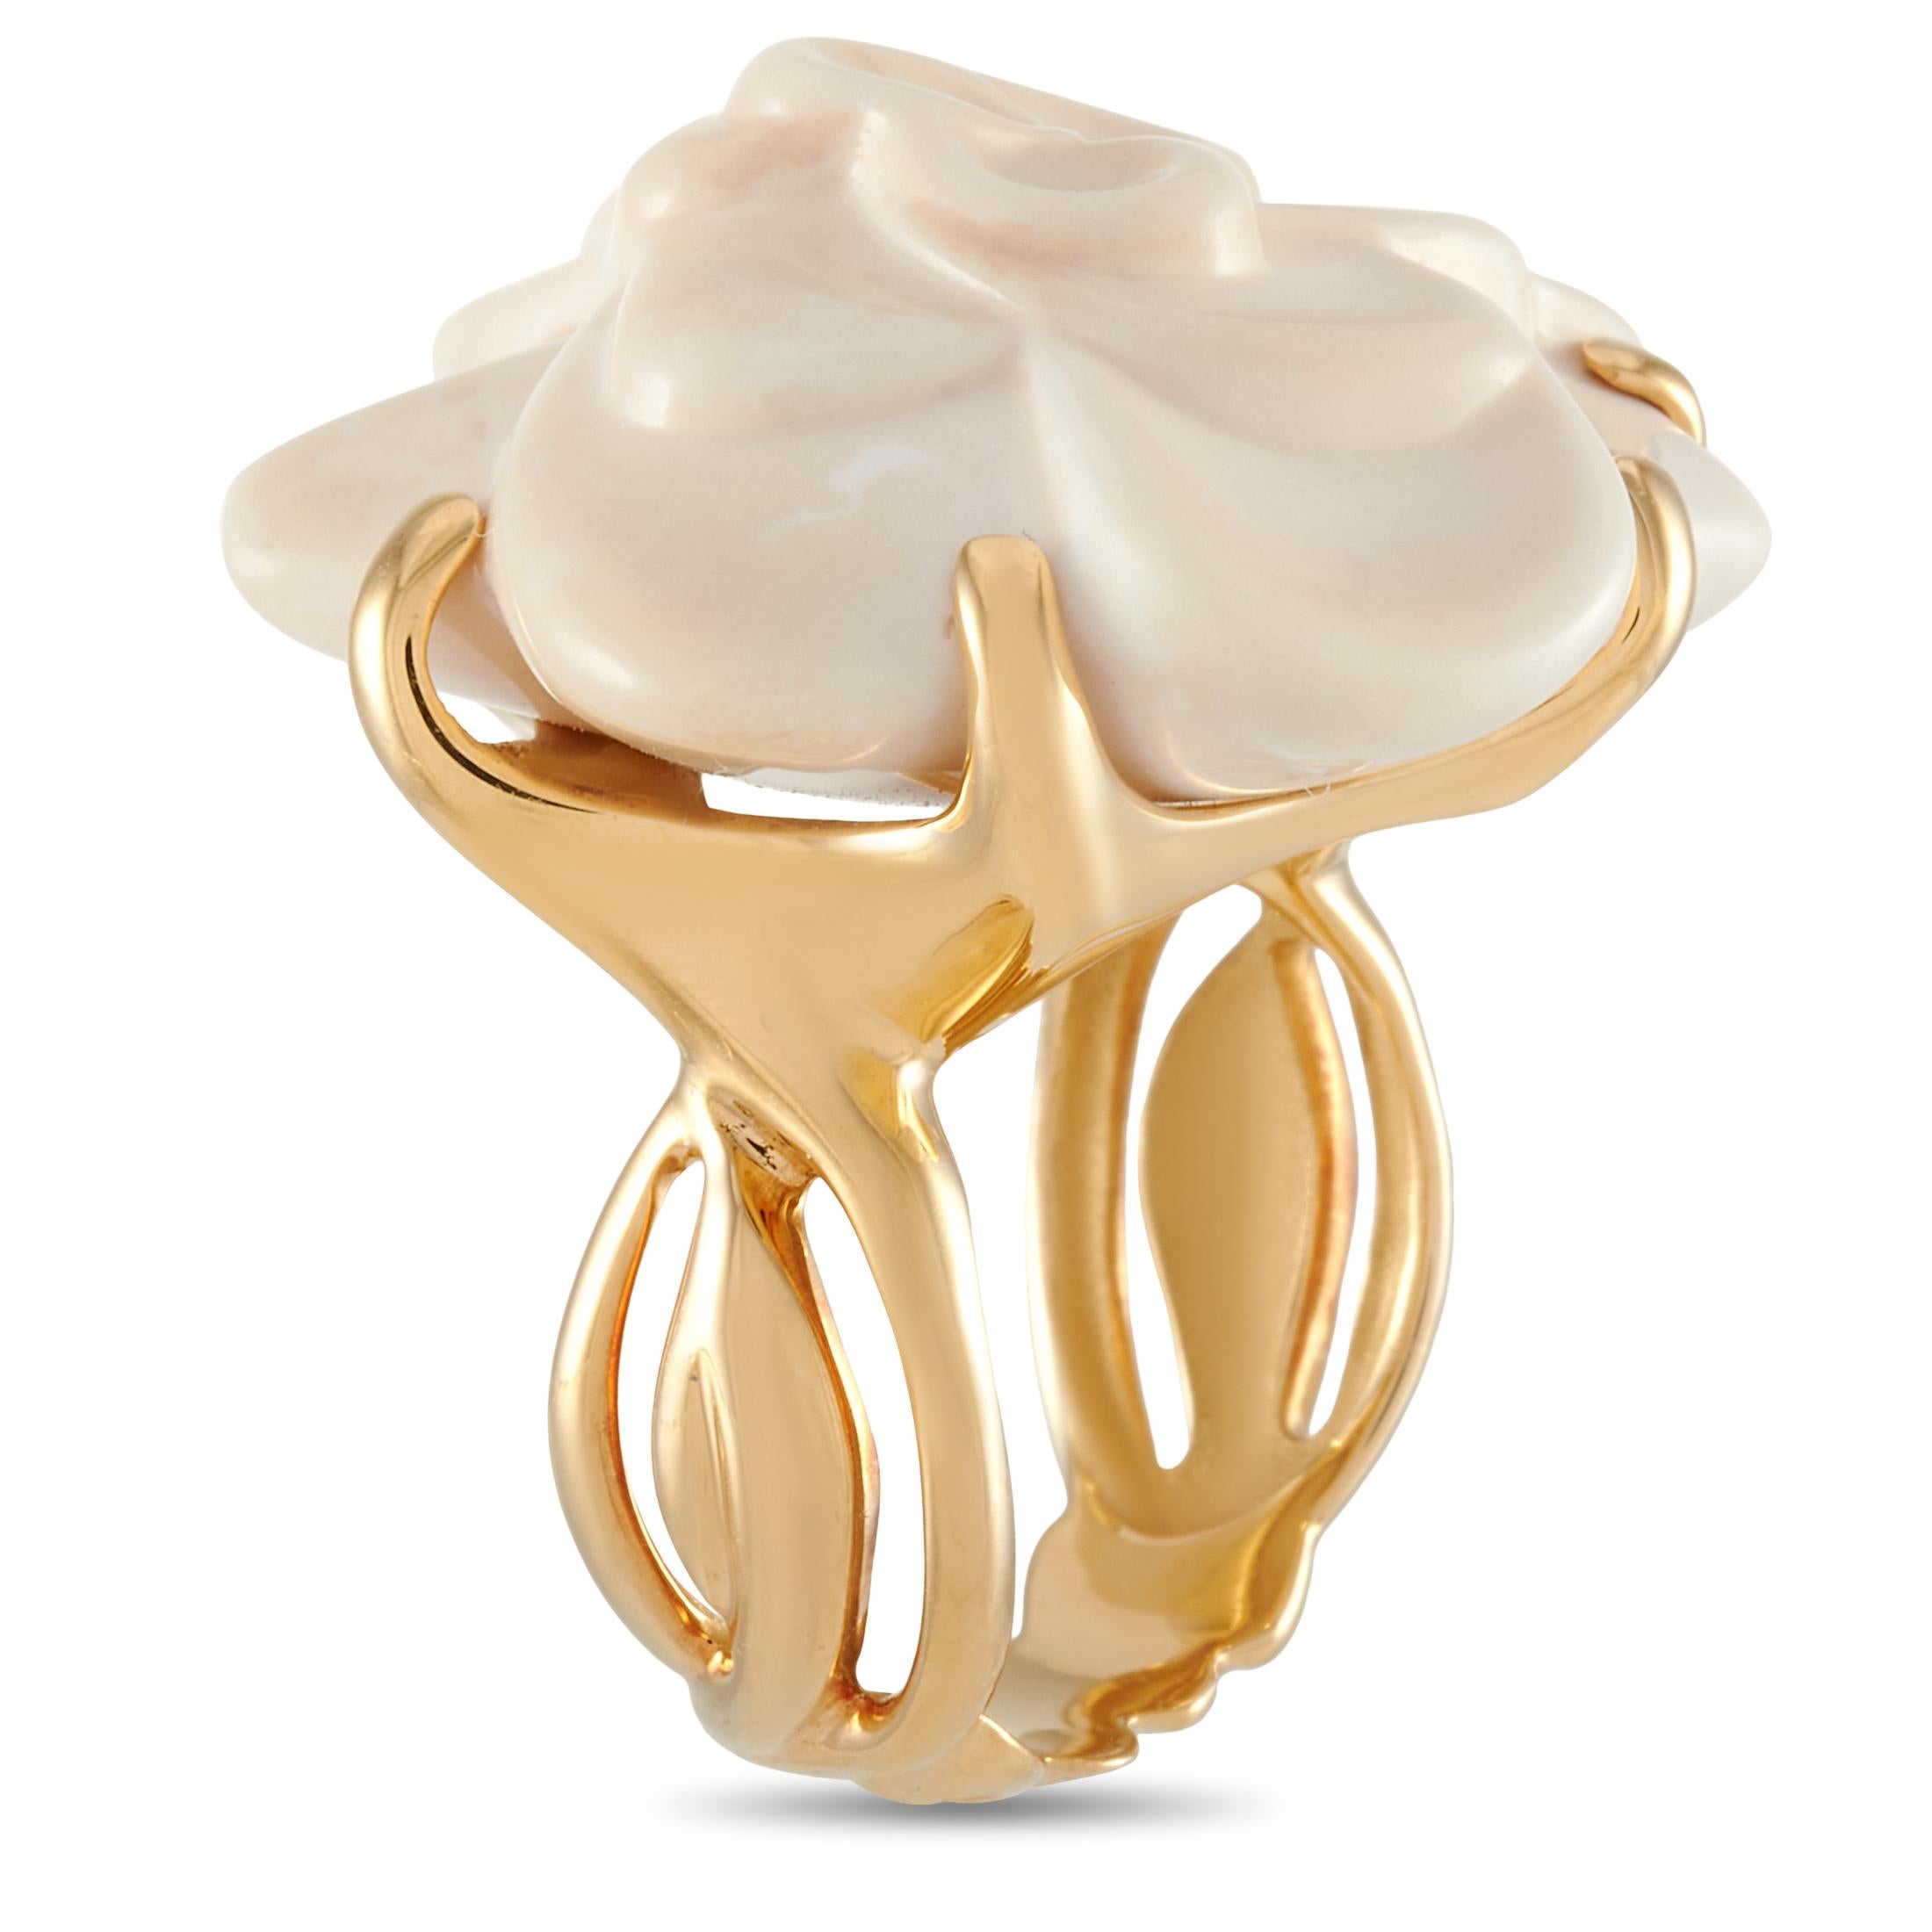 The Chanel “Camélia” ring is made out of 18K yellow gold and ceramic and weighs 14.7 grams. The ring boasts band thickness of 8 mm and top height of 12 mm, while top dimensions measure 25 by 27 mm.